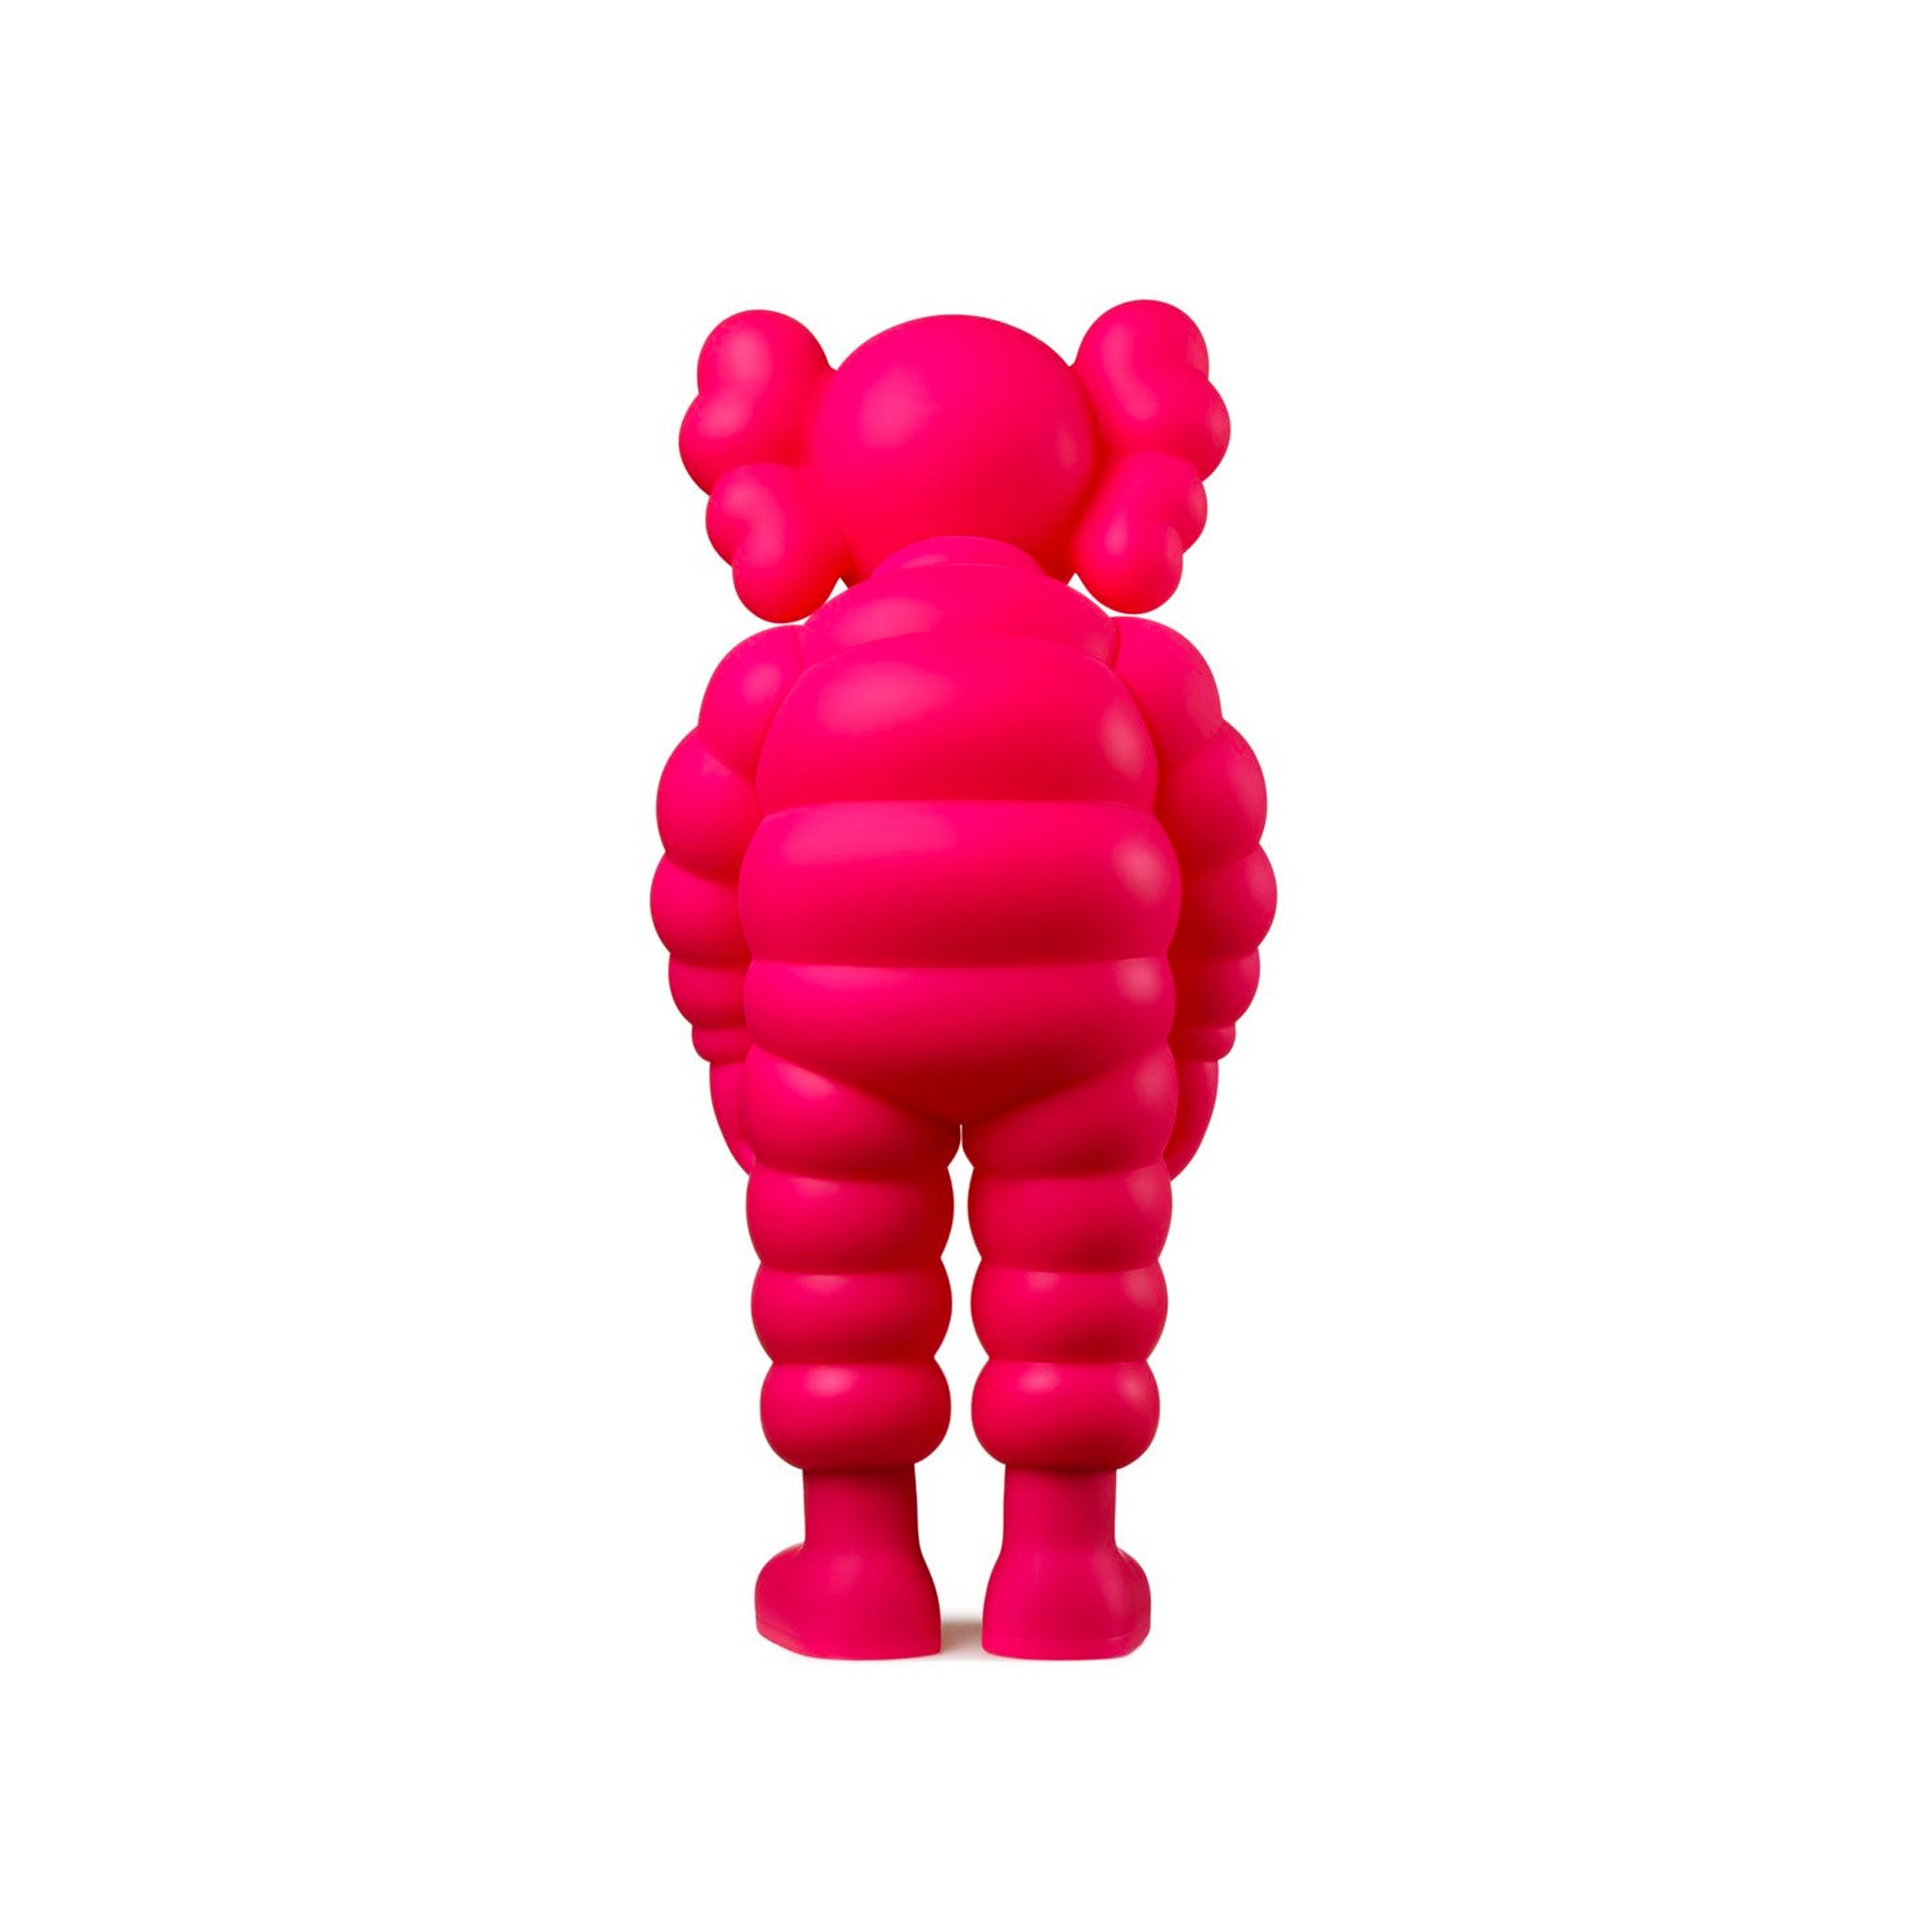 KAWS WHAT PARTY OPEN EDITION PINK